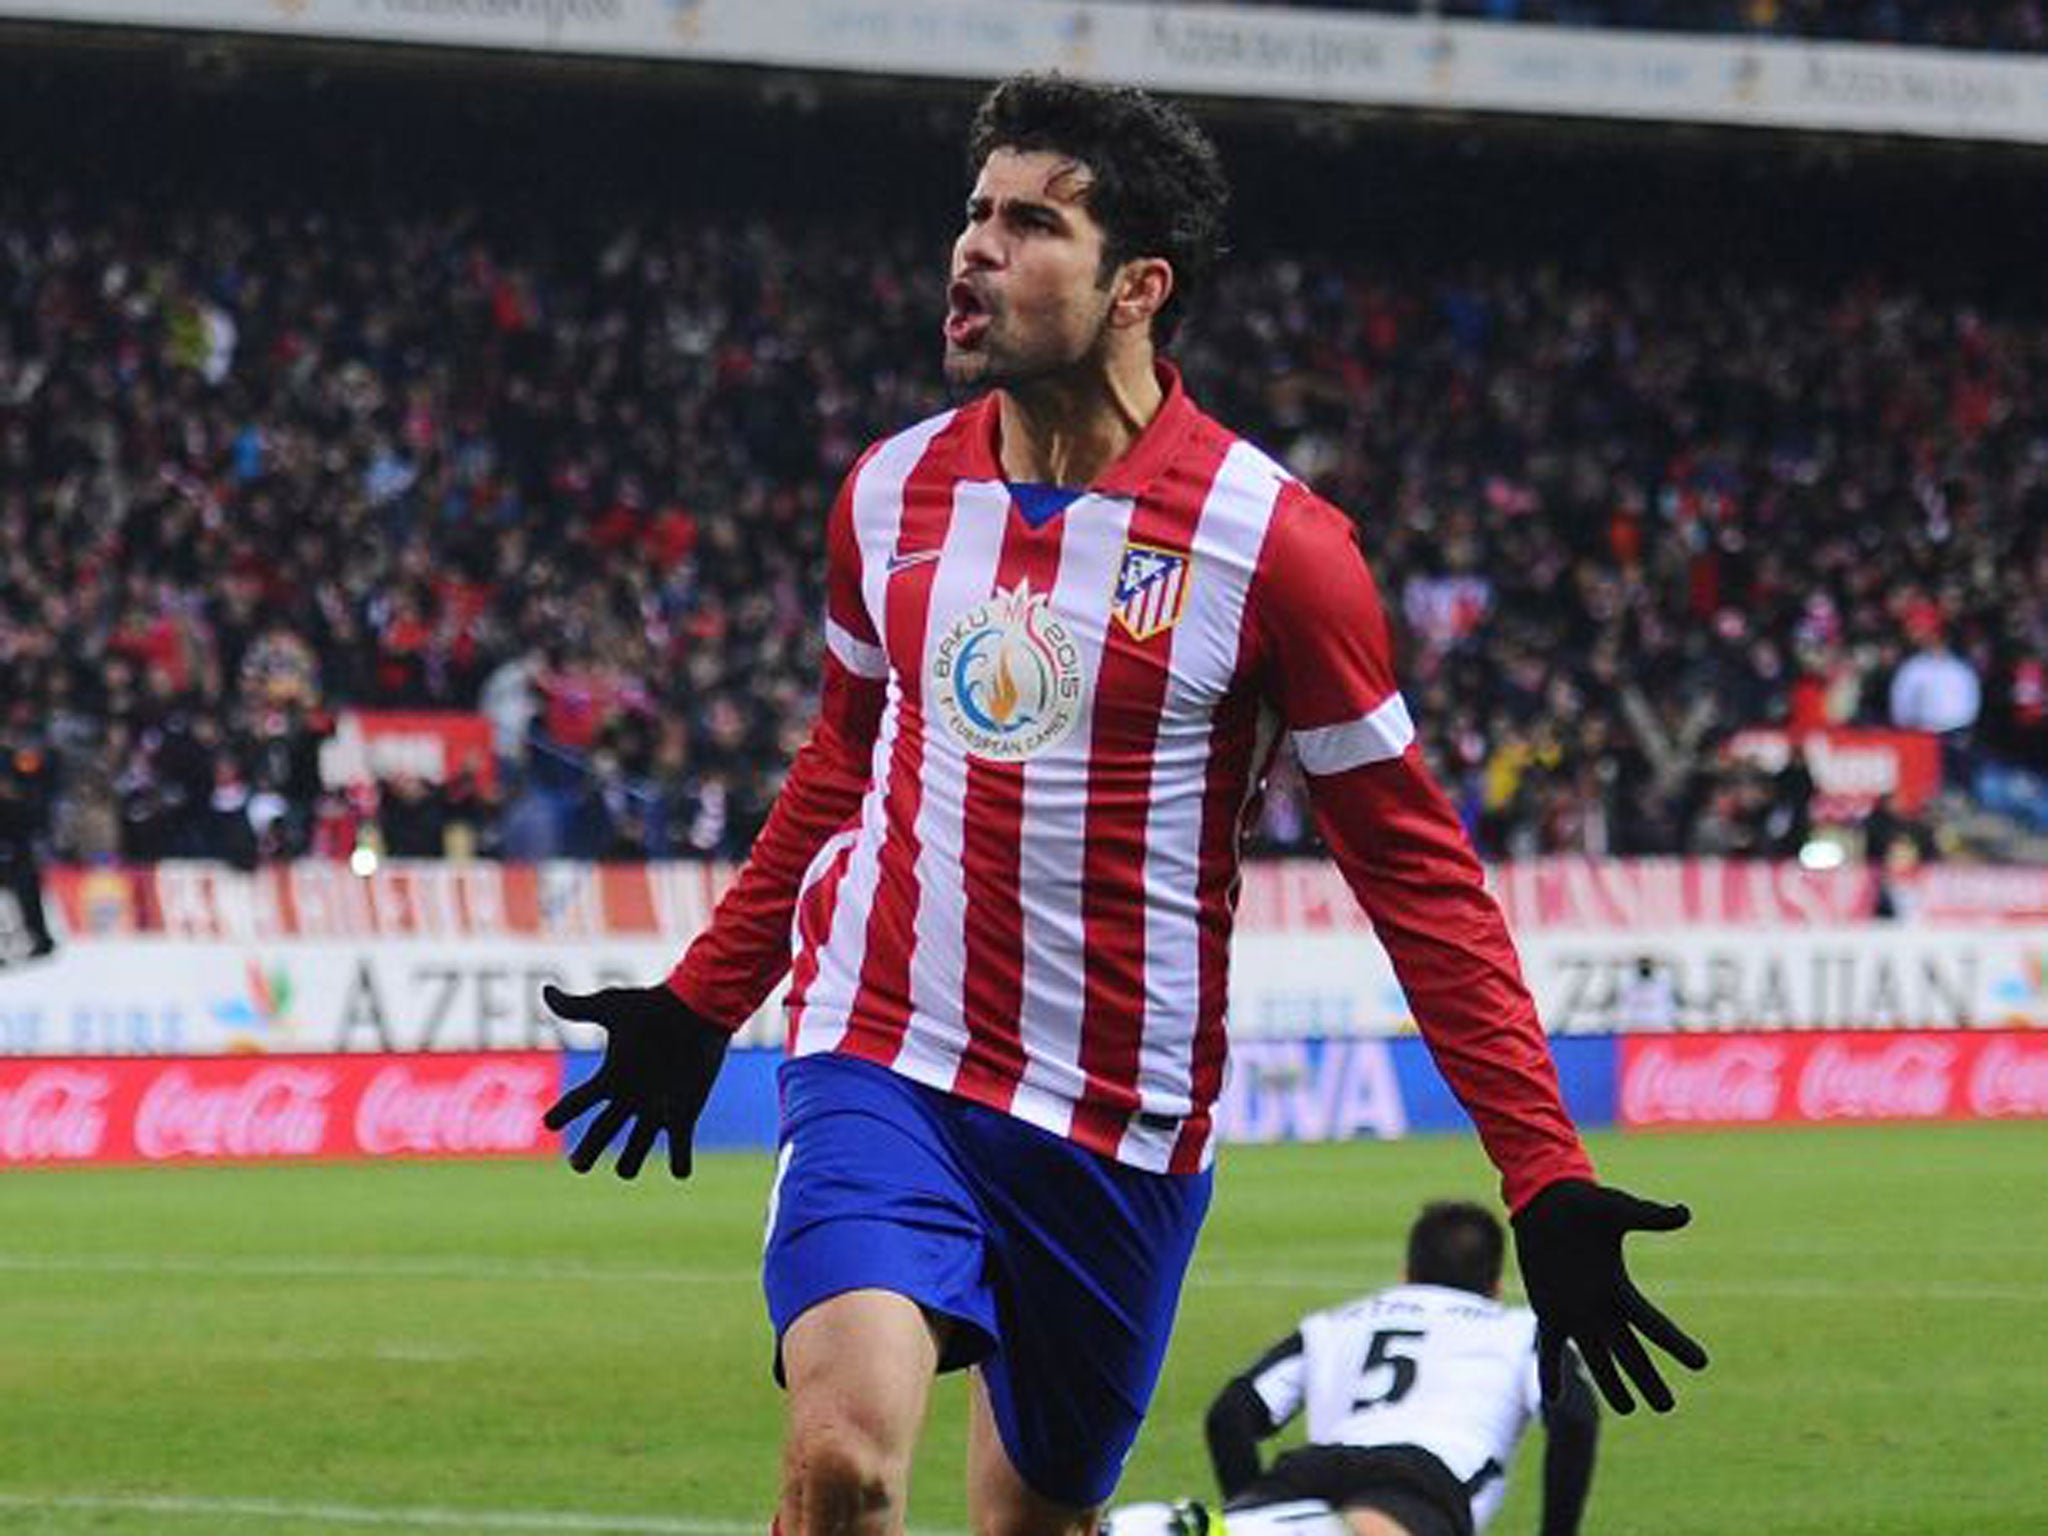 Diego Costa celebrates scoring for Spain’s league leaders Atletico Madrid